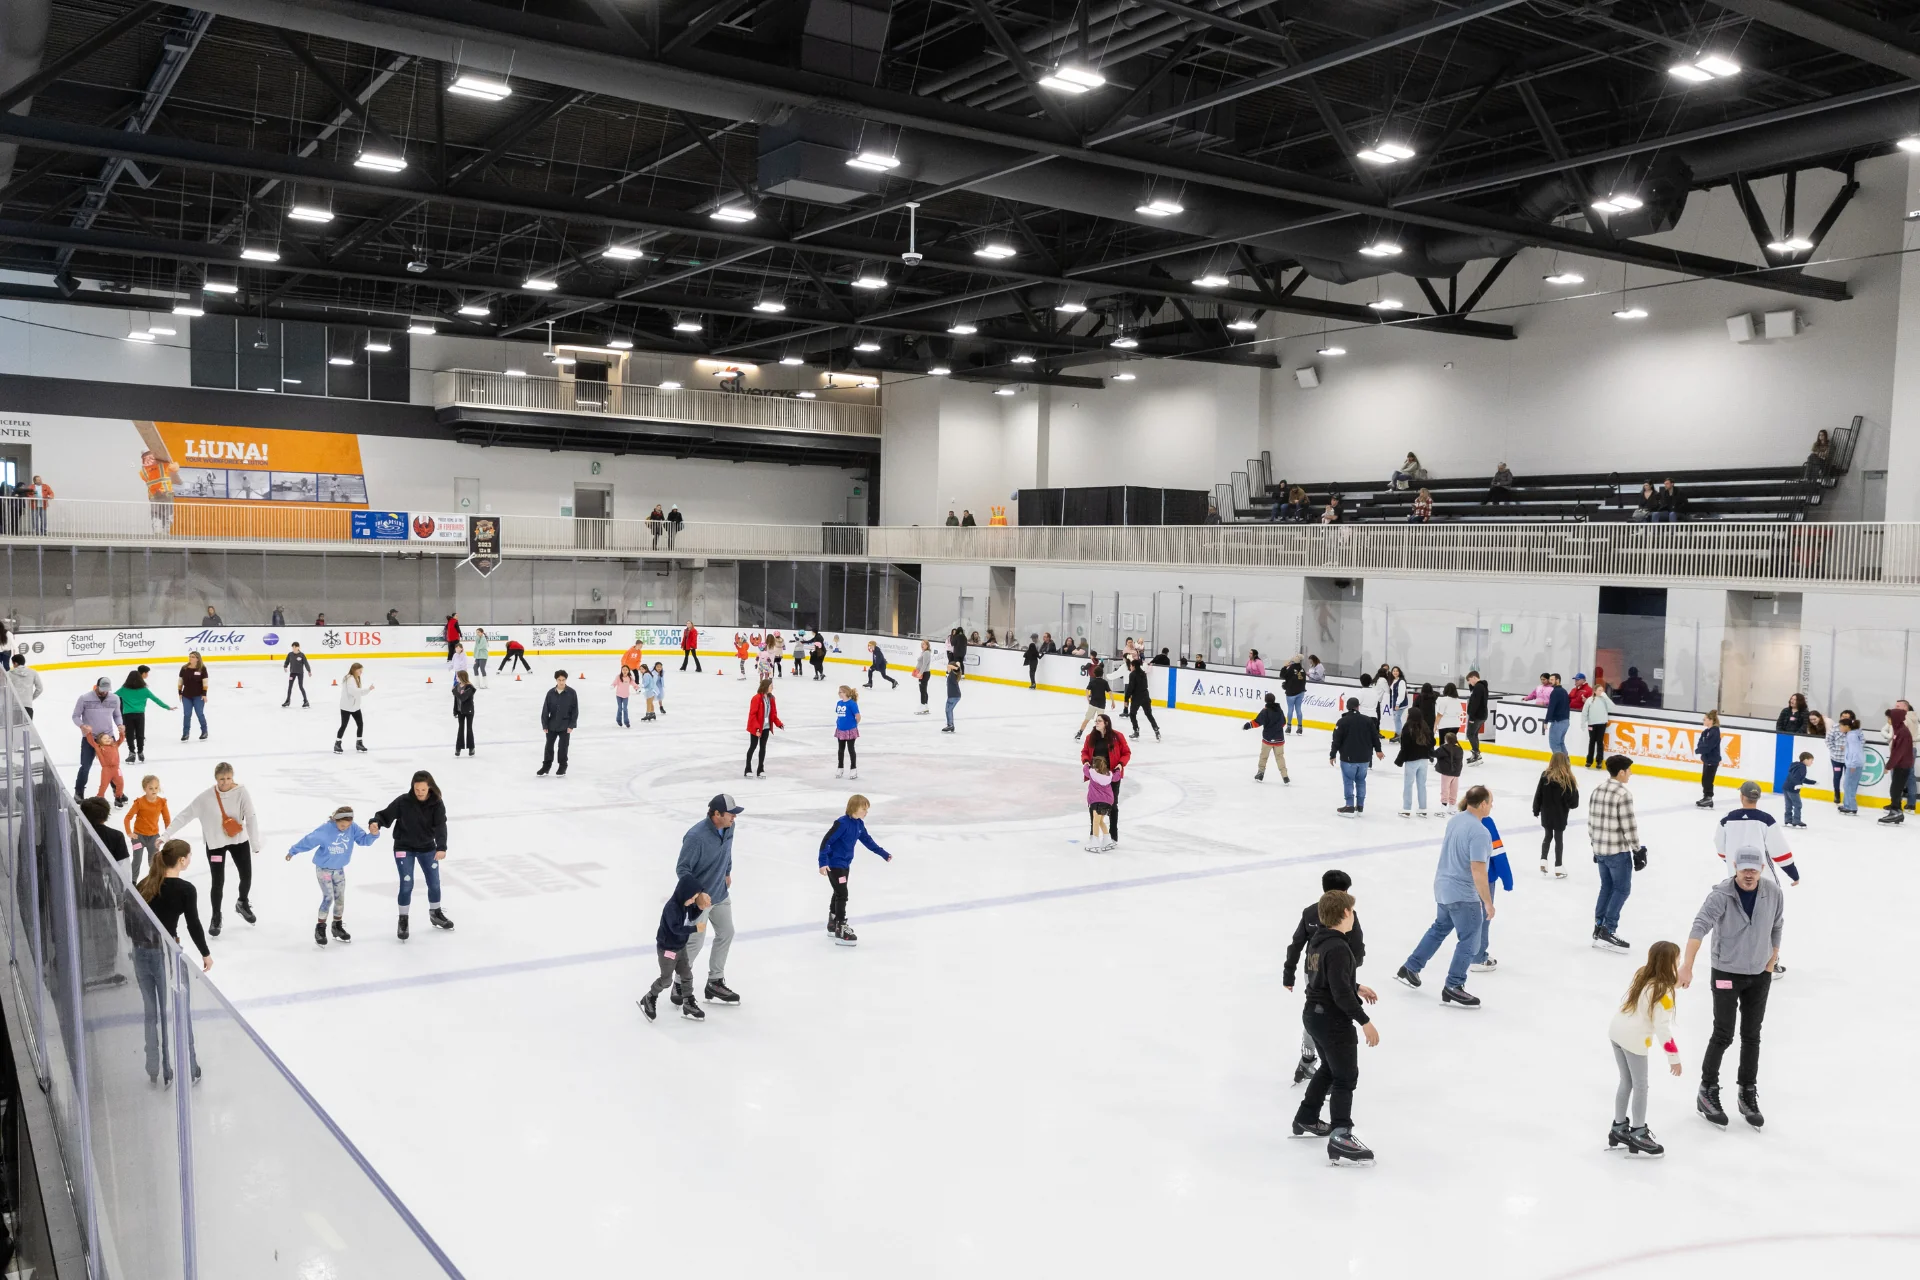 Public Sessions take place daily at the Berger Foundation Iceplex